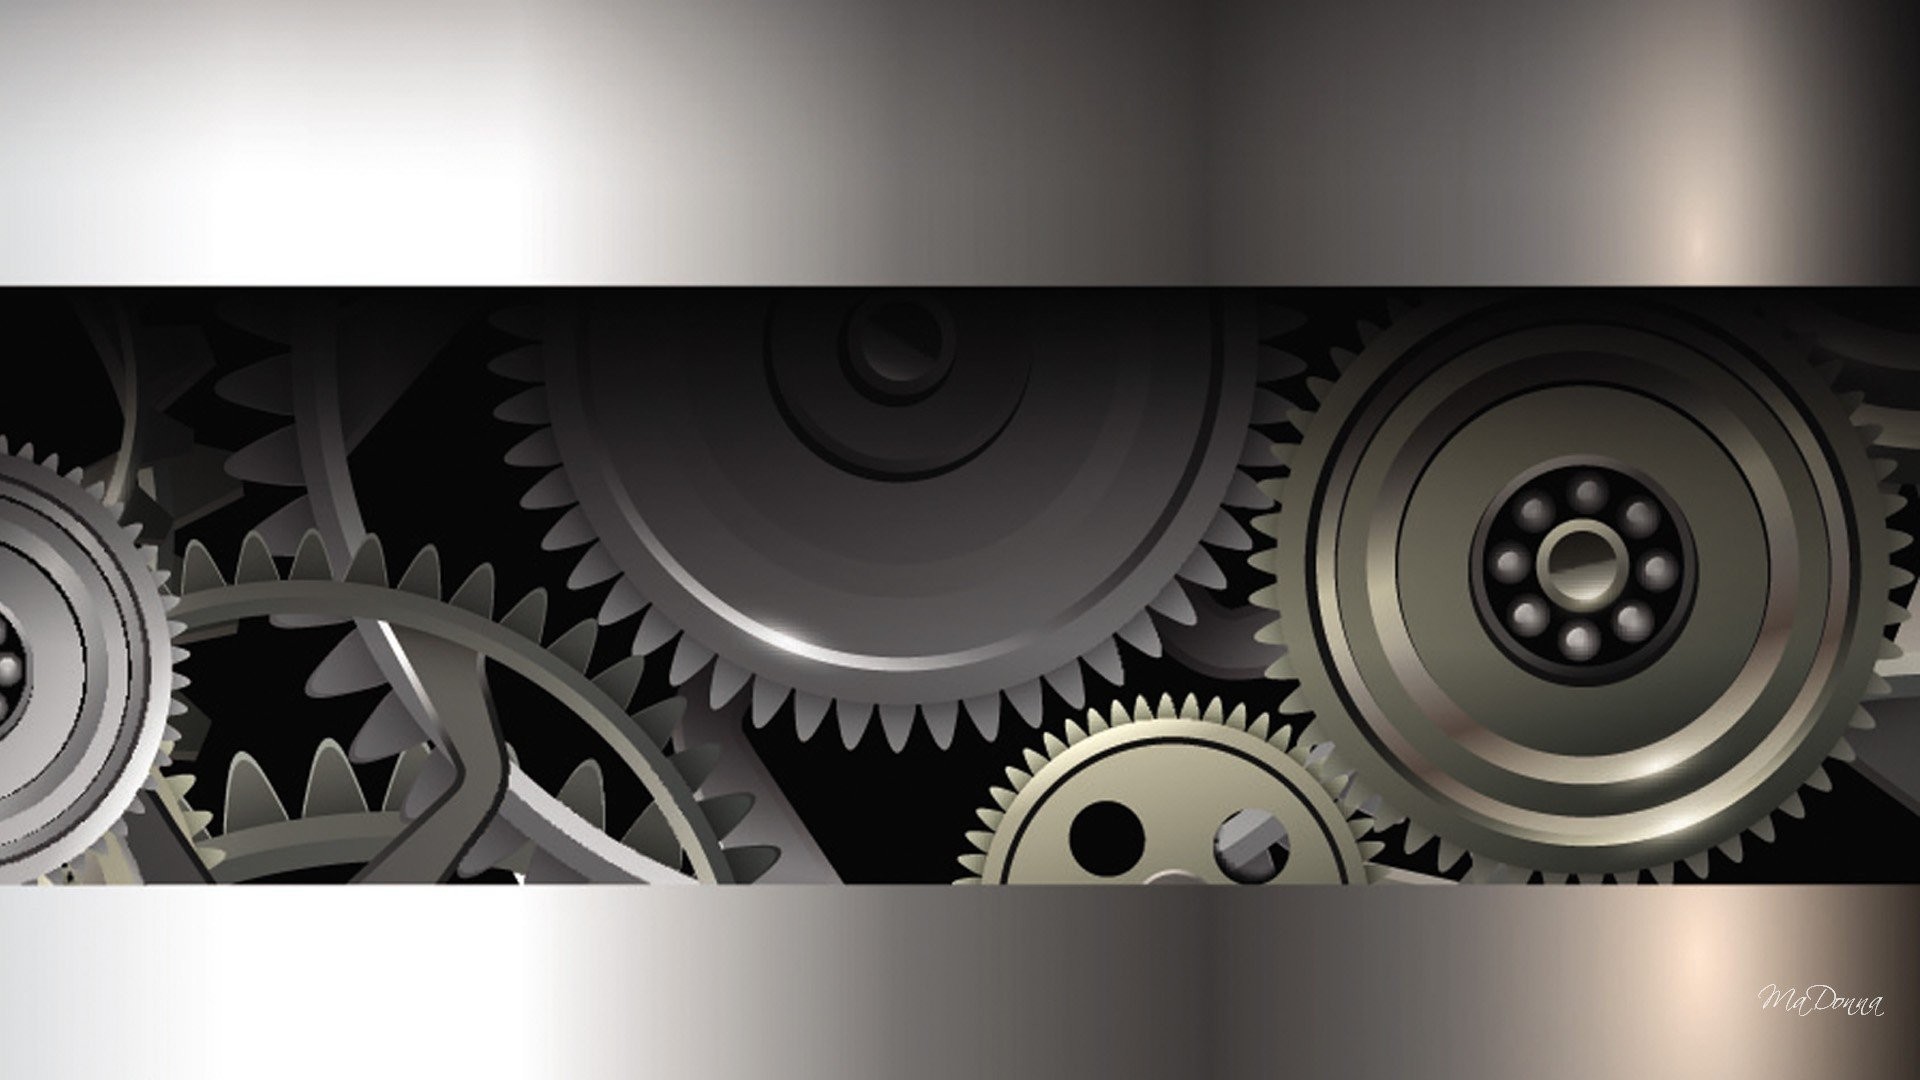 Steampunk Gears Wallpaper 75 Images HD Wallpapers Download Free Images Wallpaper [wallpaper981.blogspot.com]